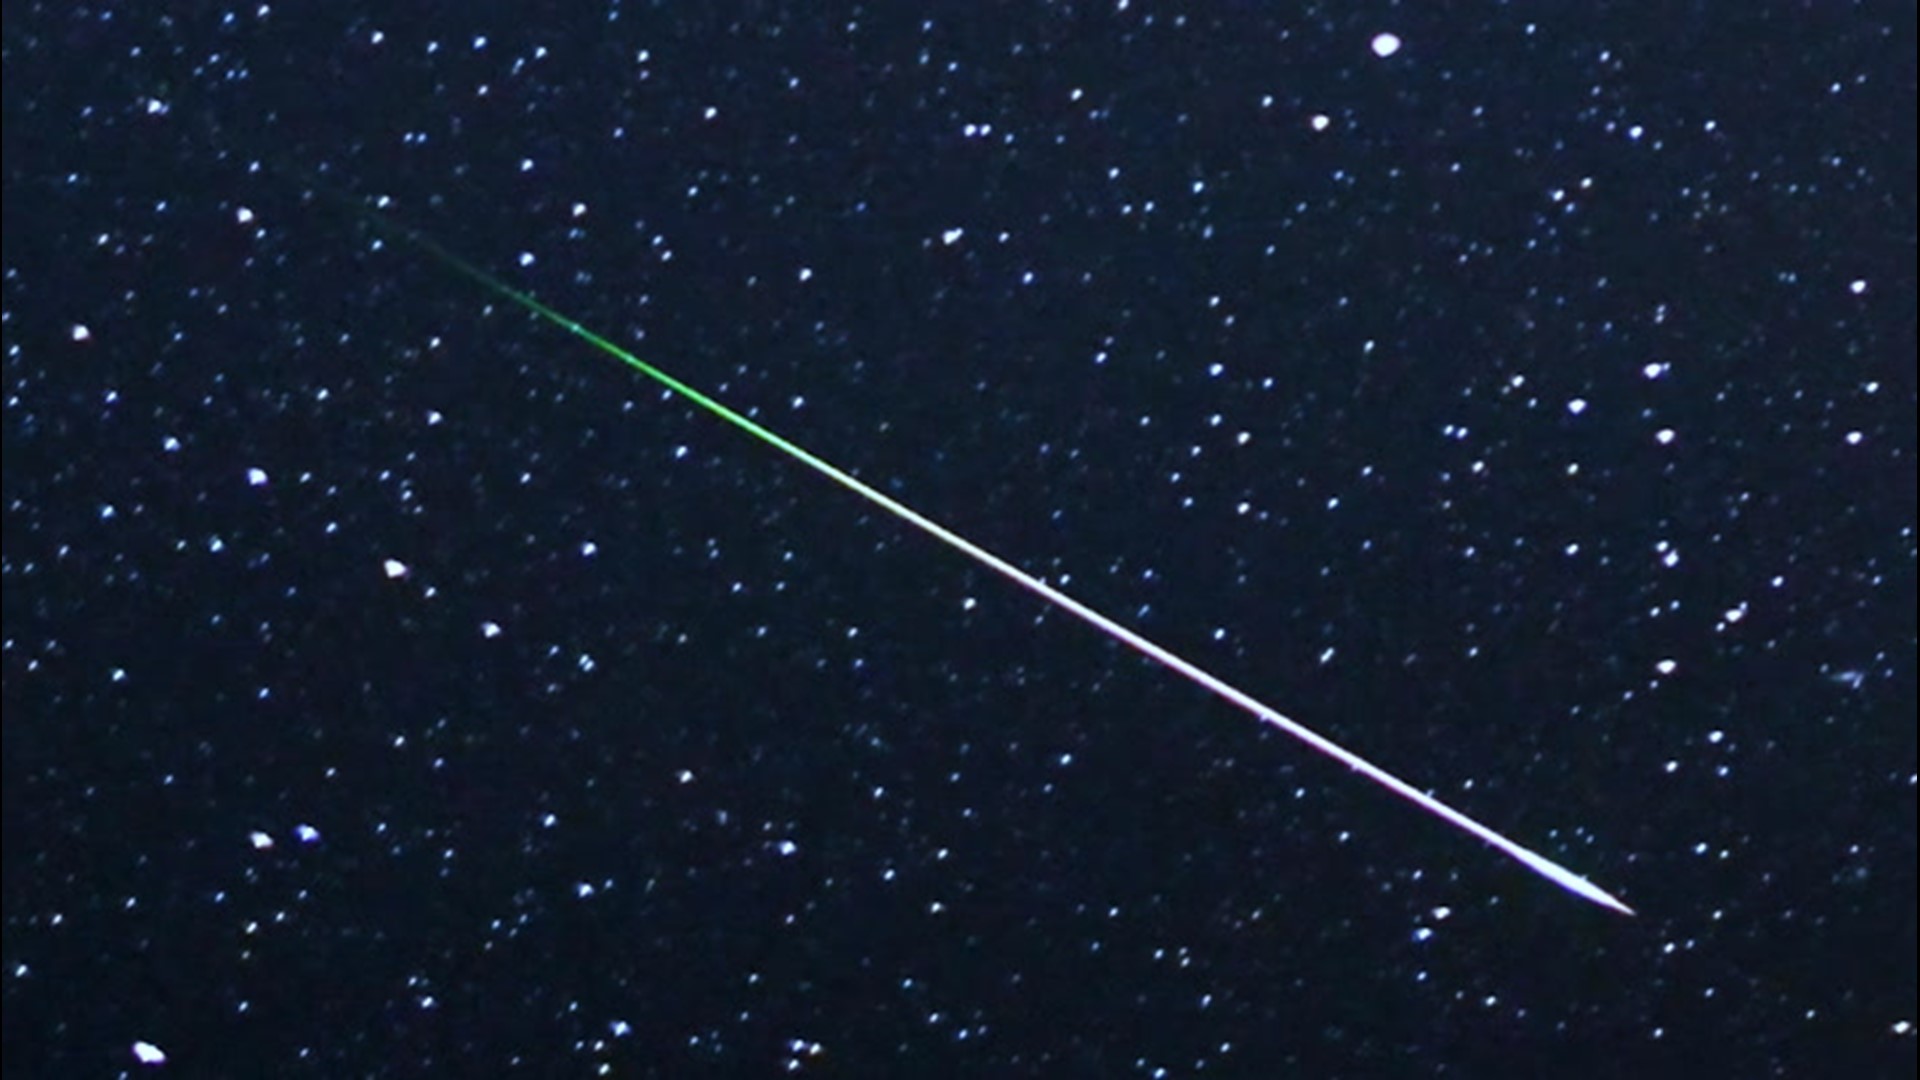 The Perseids, one of the best meteor showers of the year, peaks on Aug. 11-12, boasting between 50-75 meteors per hour. Be sure to mark this on your calendar.